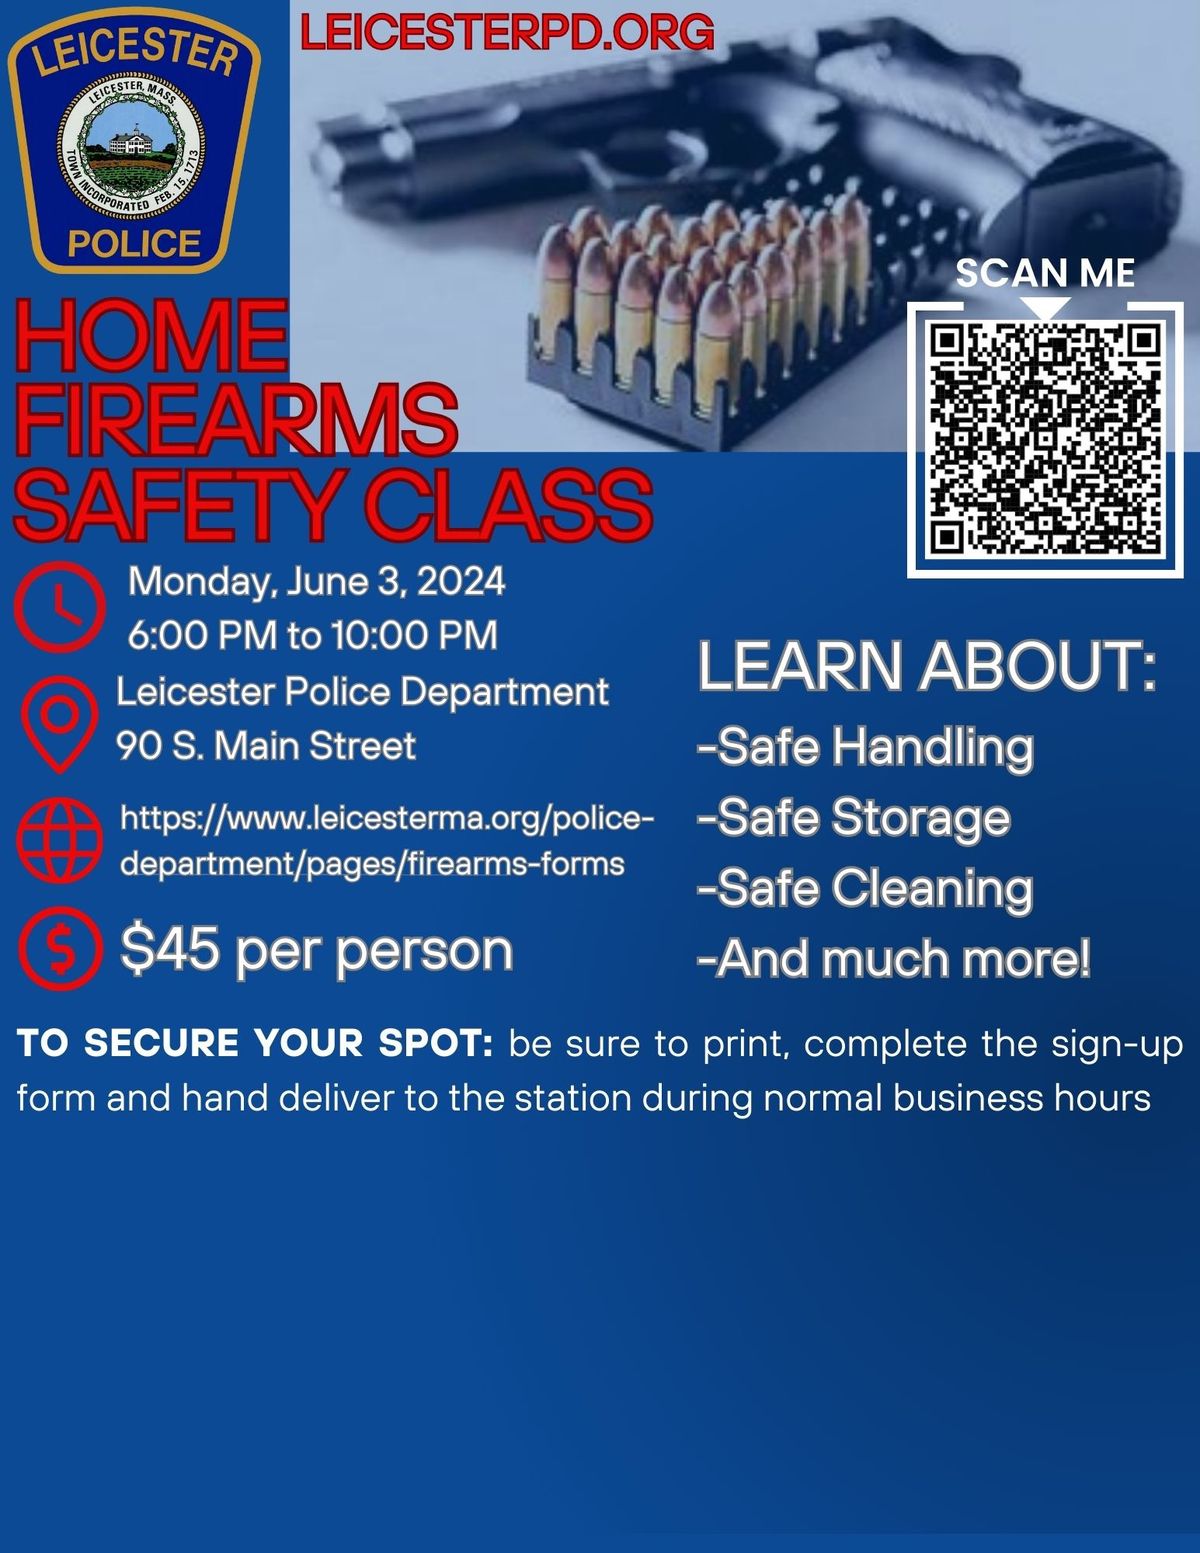 Home Firearms Safety Class